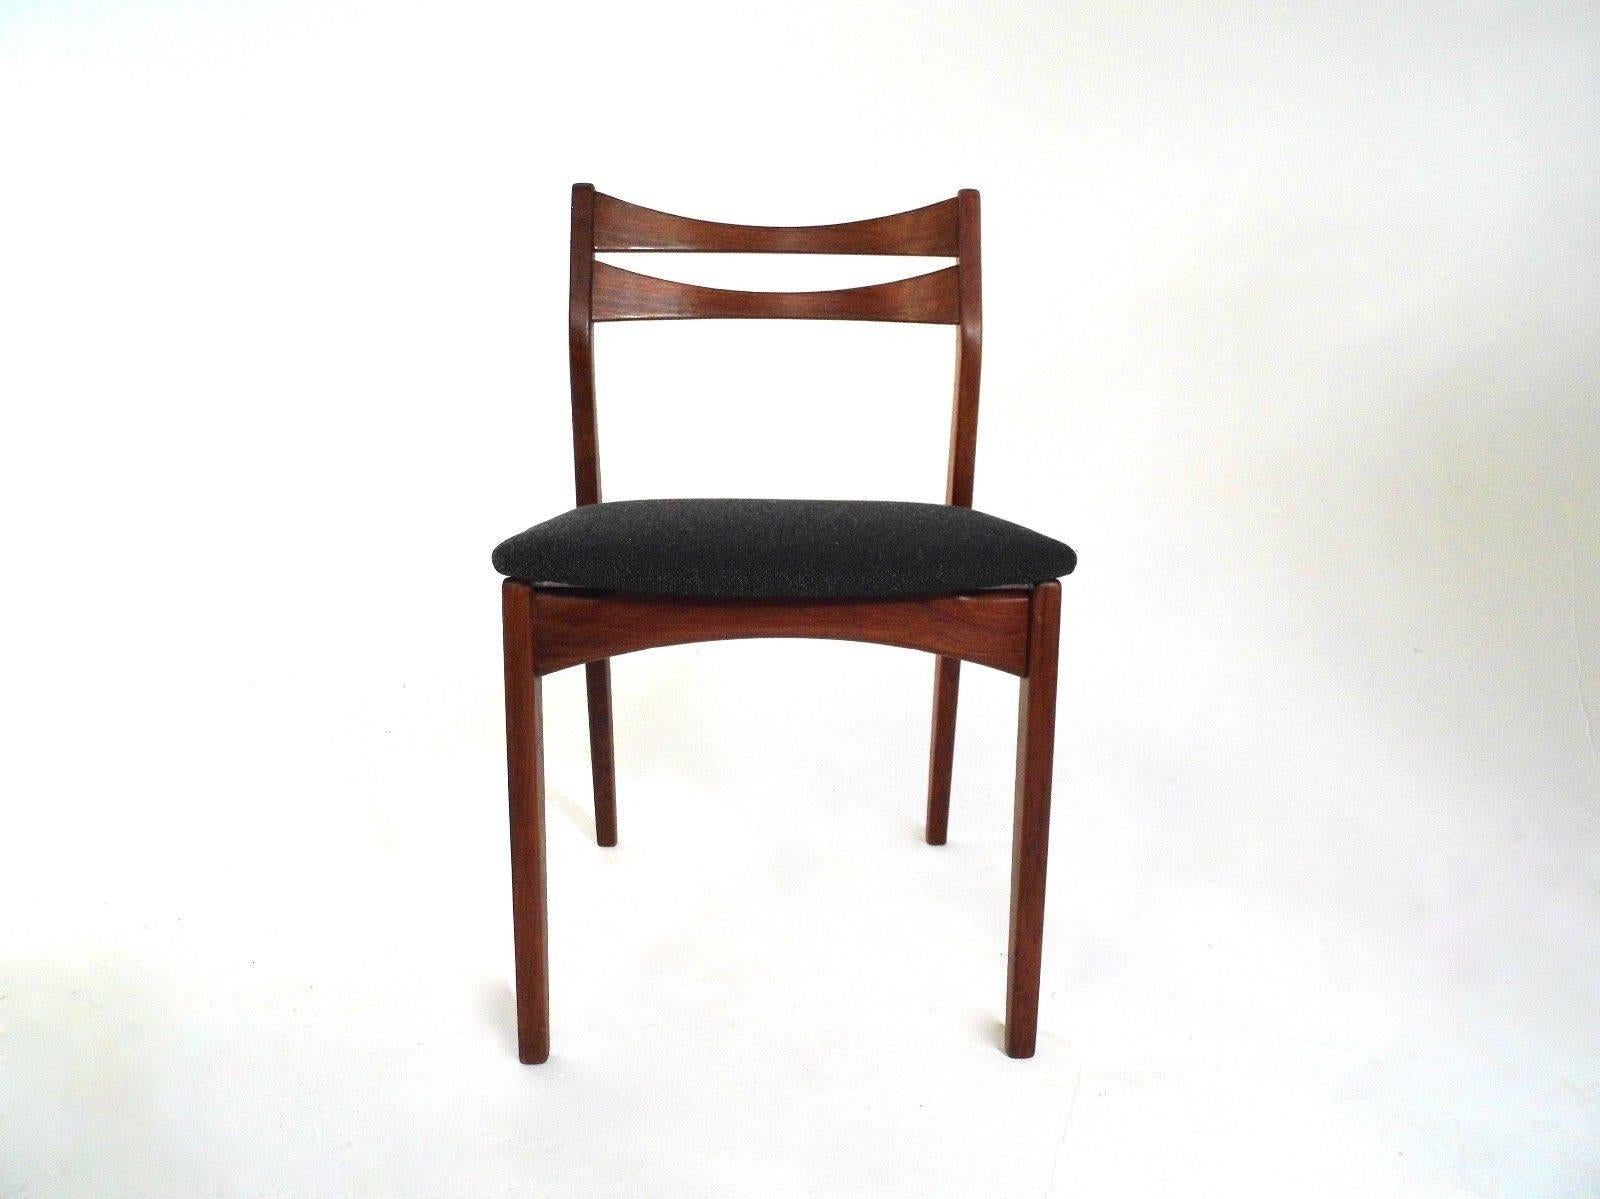 A beautiful set of four Danish teak and grey fabric dining chairs; these would make a stylish addition to any dining area. The chairs have wide seat pads and sculptured teak back rests. A striking piece of classically designed Scandinavian